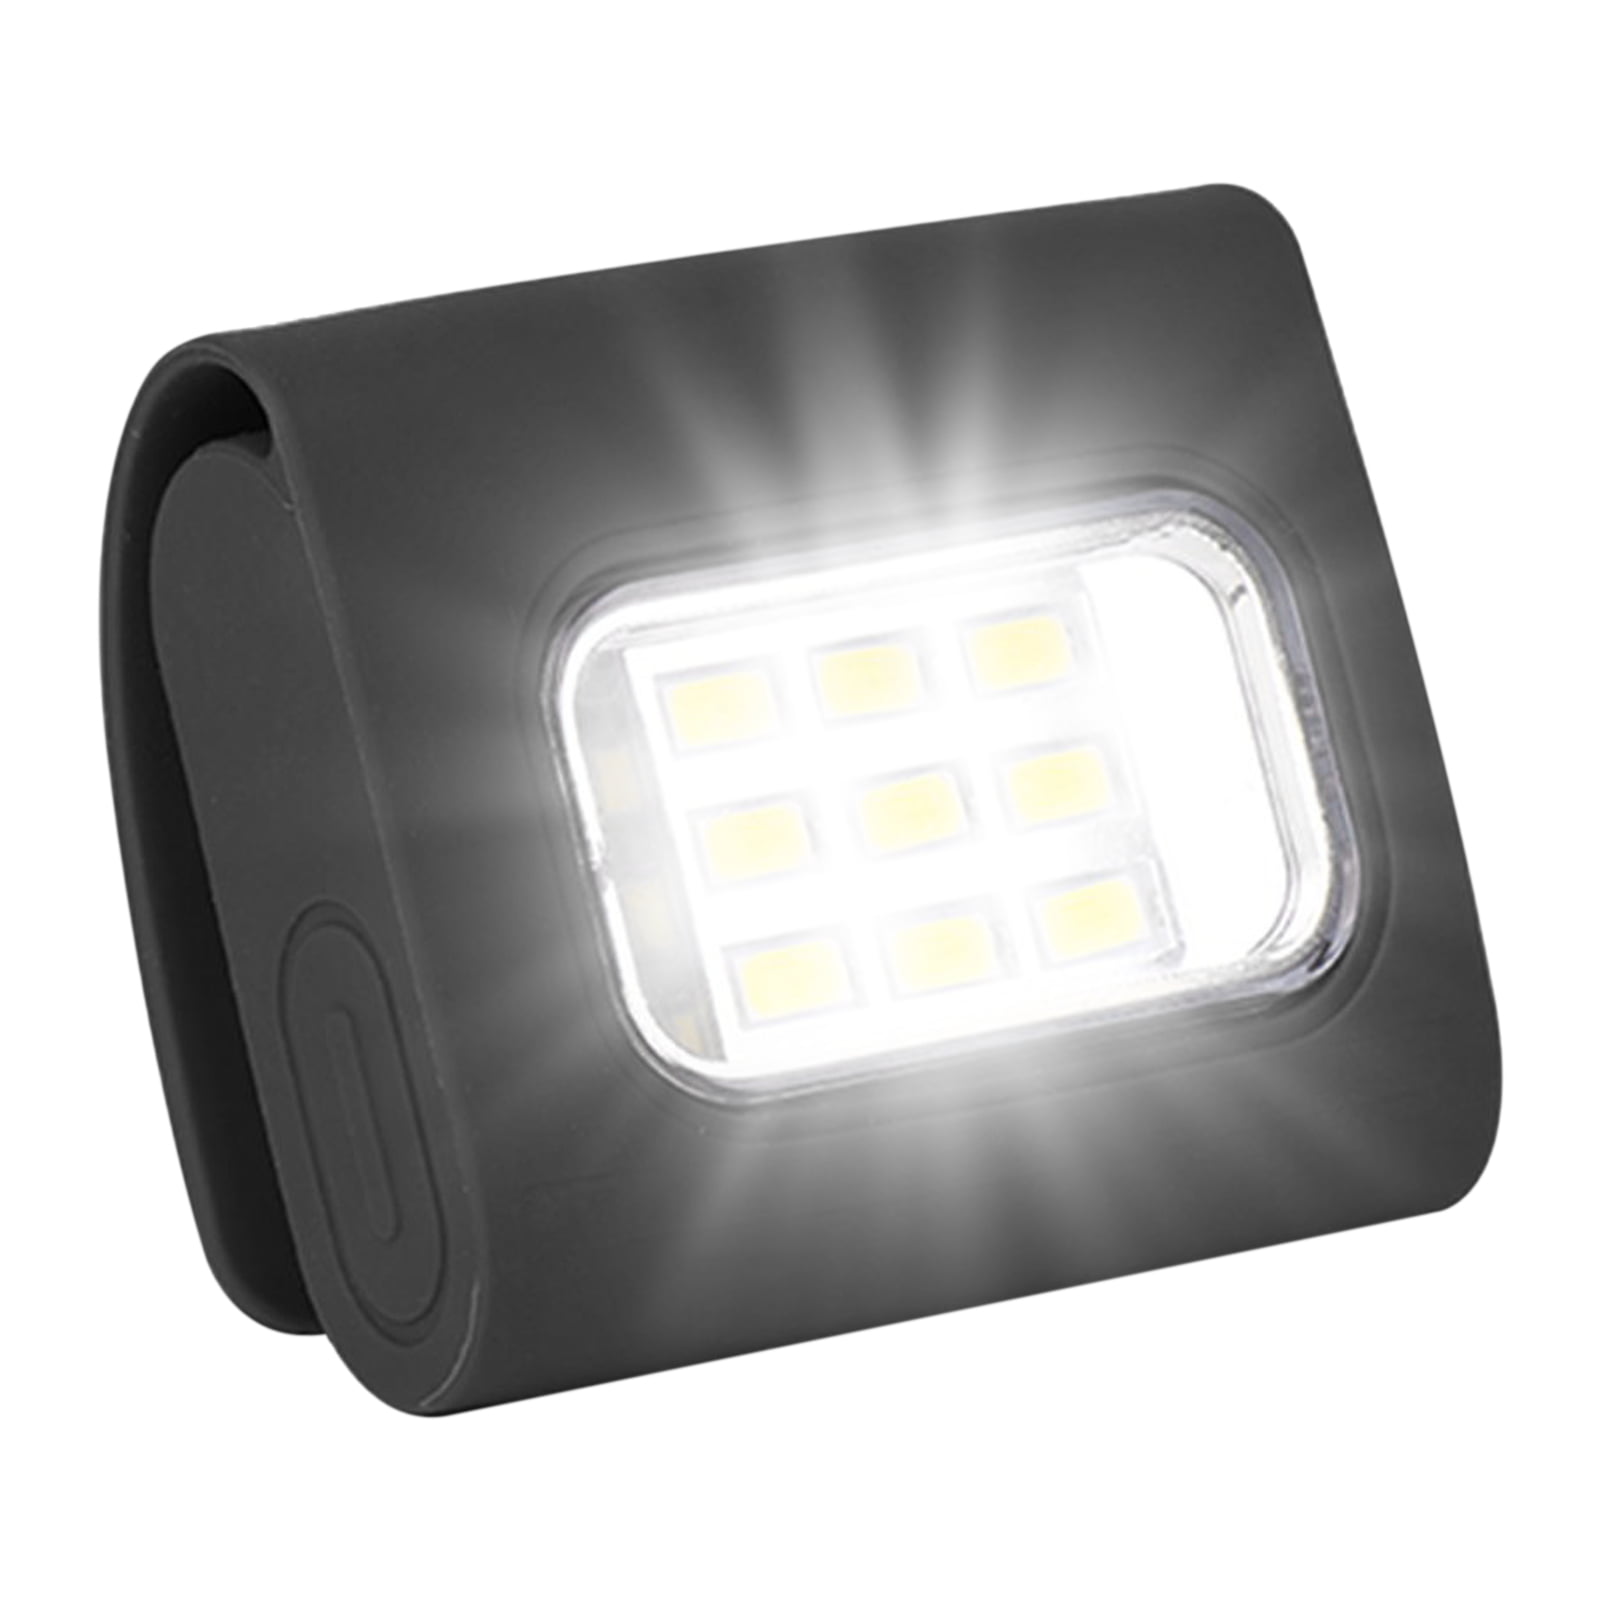 Details about   Mini Clip Light LED Warning Light Mini Size Hands Free Clip Lamp For Running 